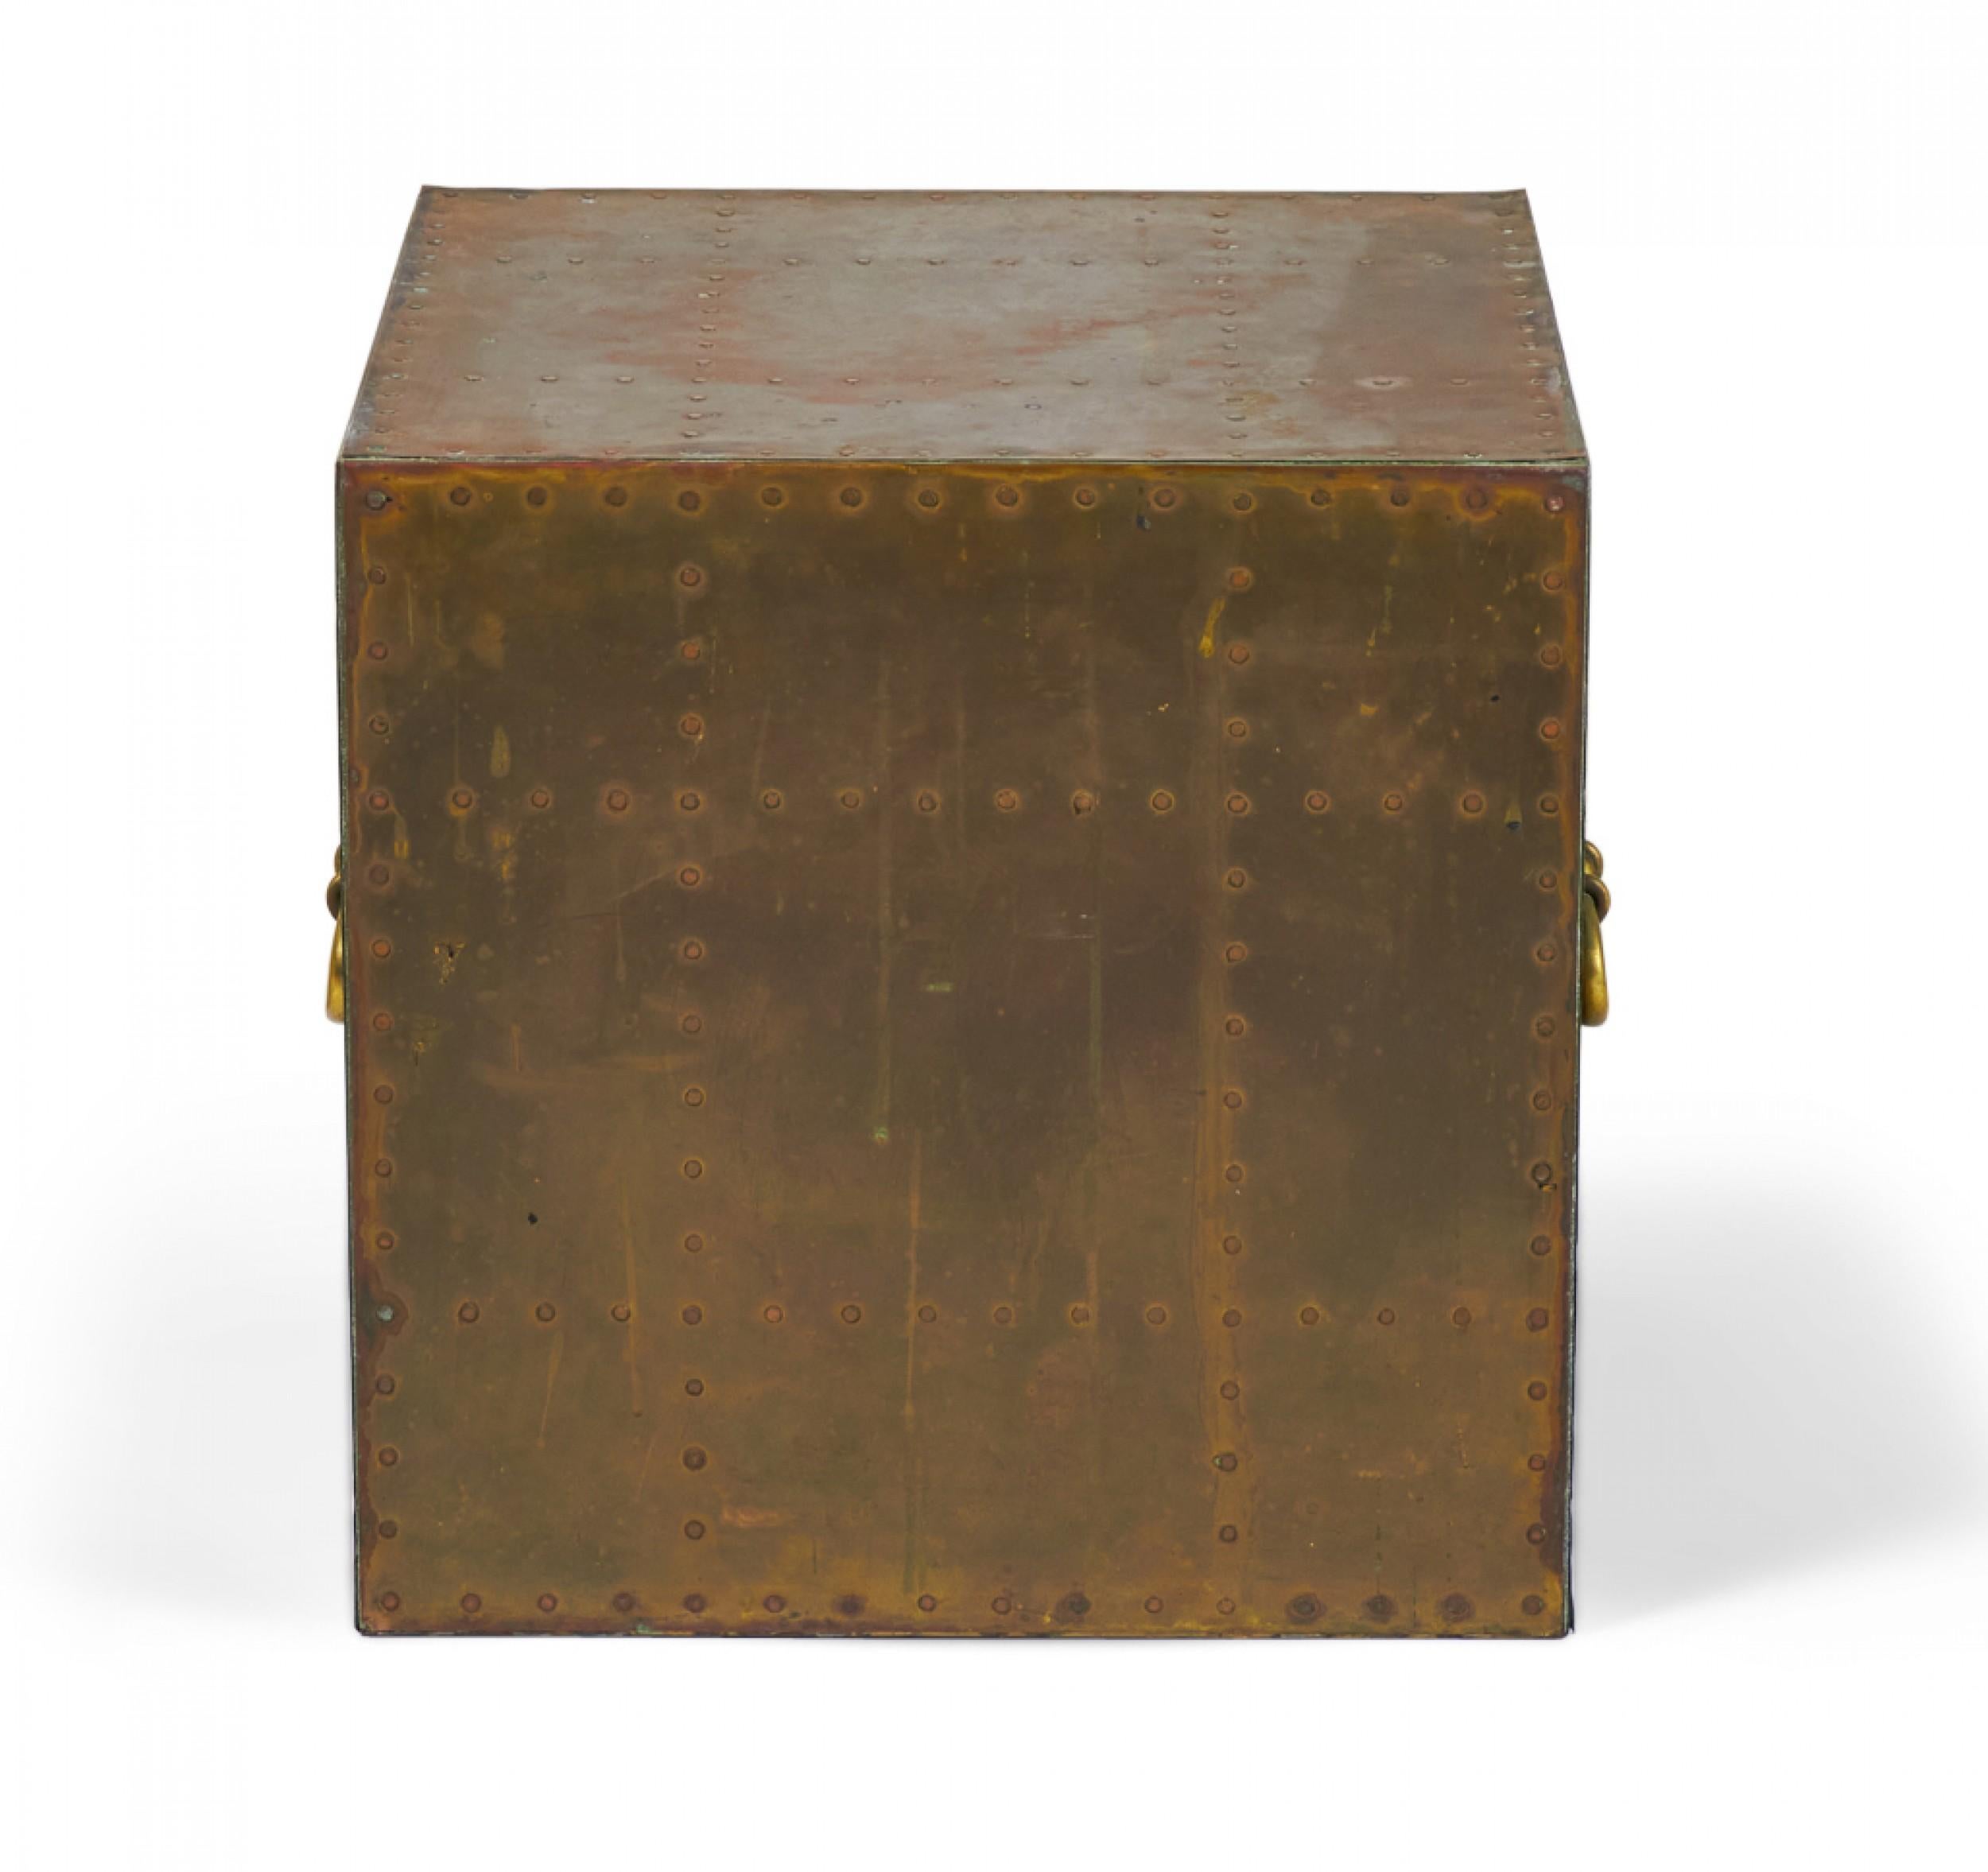 Spanish High Style brass cube occasional table with natural patina, copper studs, and two rounded brass handles. (SARREID, LTD)(Similar pieces available with different patinas: DUF0026B-F, similar commodes: DUF0025A-D)